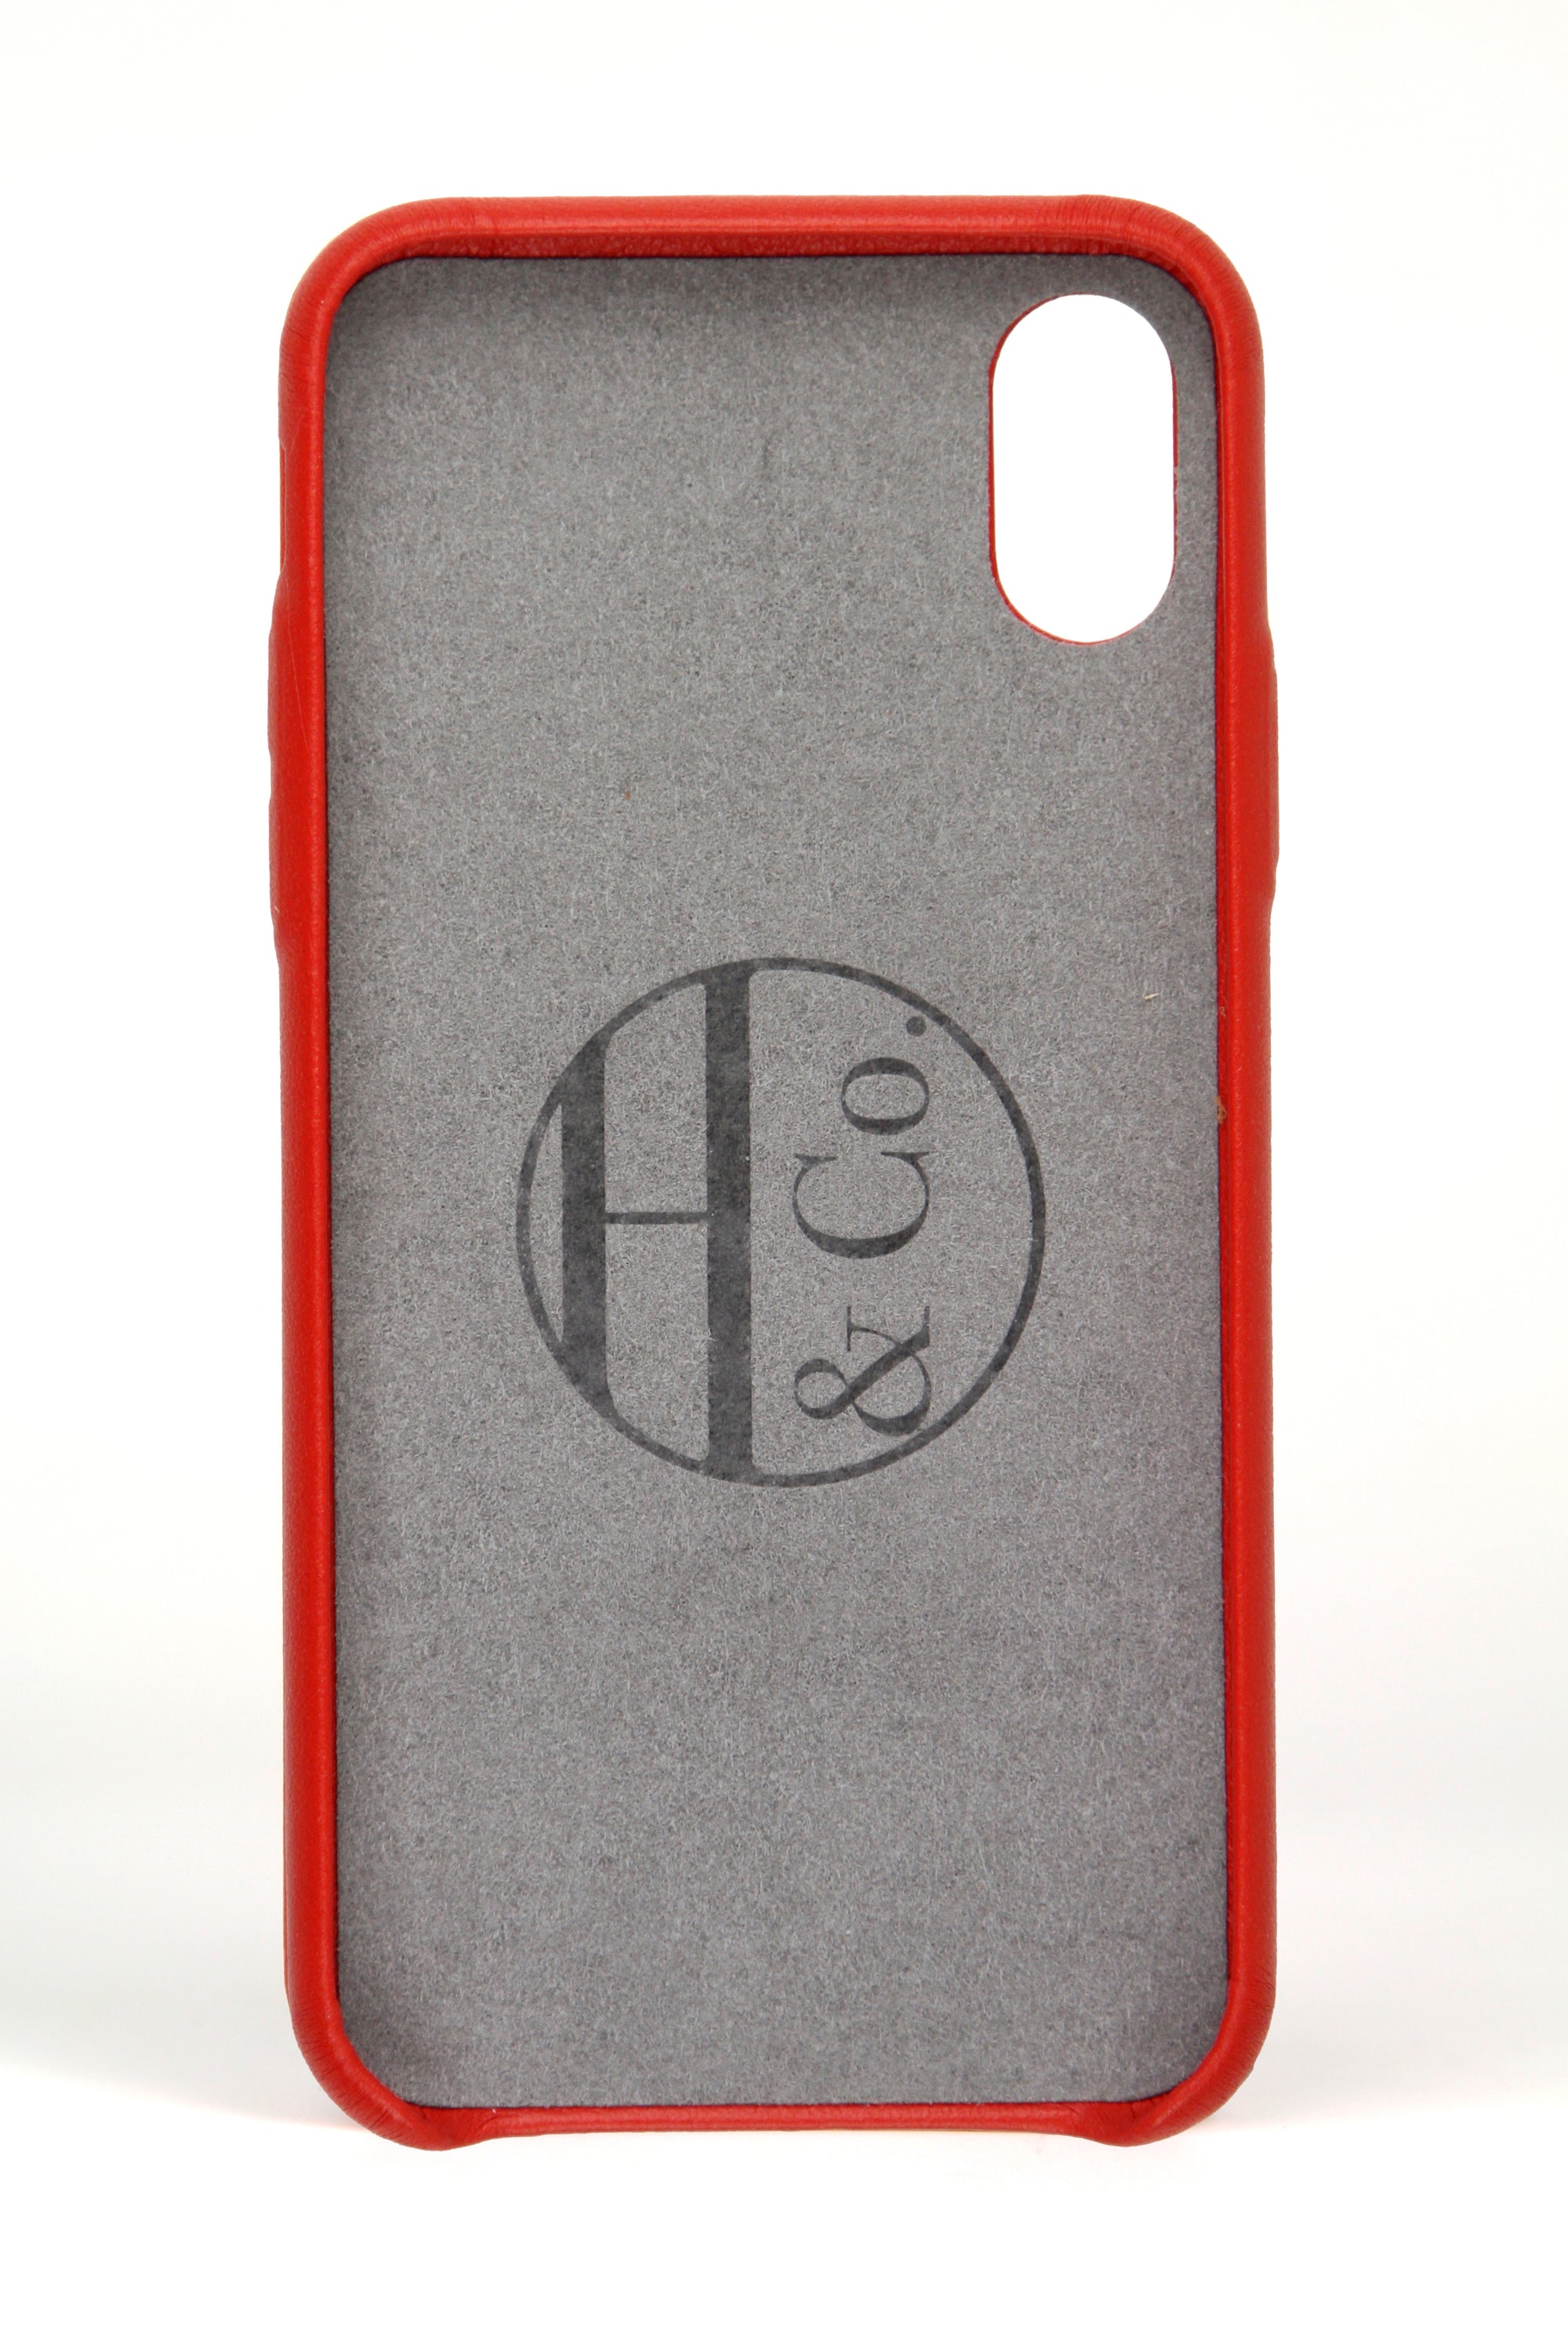 Coque pour iPhone X, cuir rouge